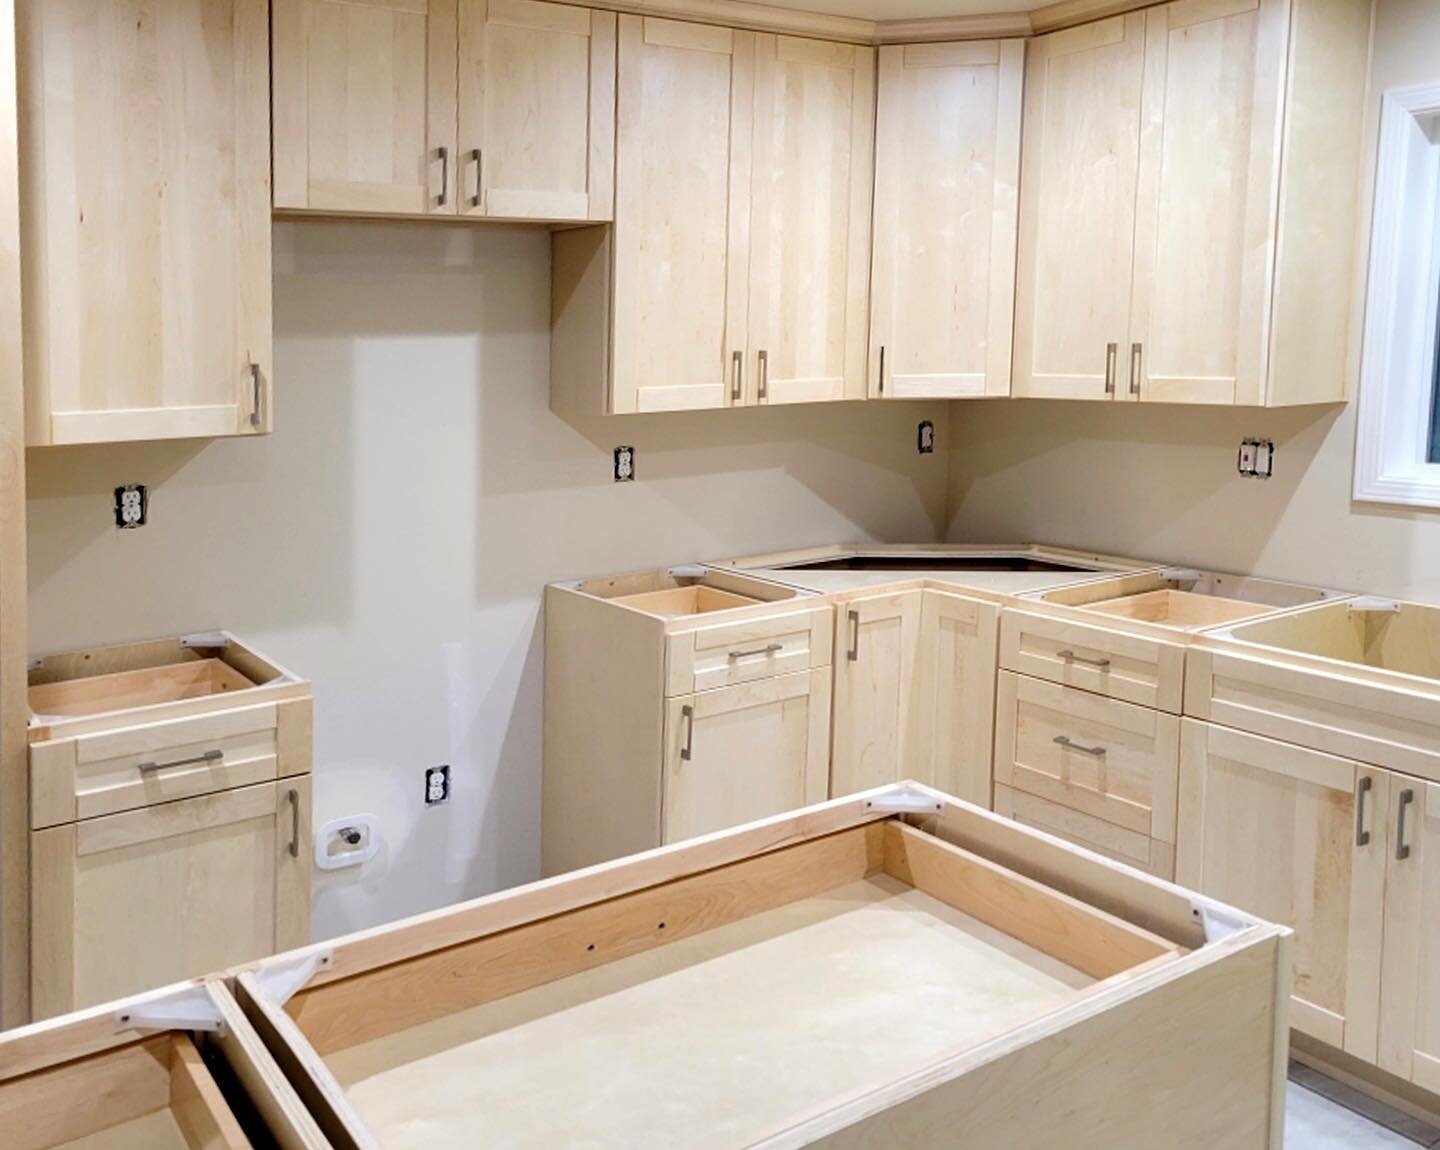 Client Work! 
____________

CABINET: Shaker Style in Natural Maple Finish 
HANDLES: Chrome Finish

Shaker Style also available in multiple finishes! 
____________

#intetiordesign #kitchendesign #showroom #kitchencabinets #shakercabinets #berensonhar